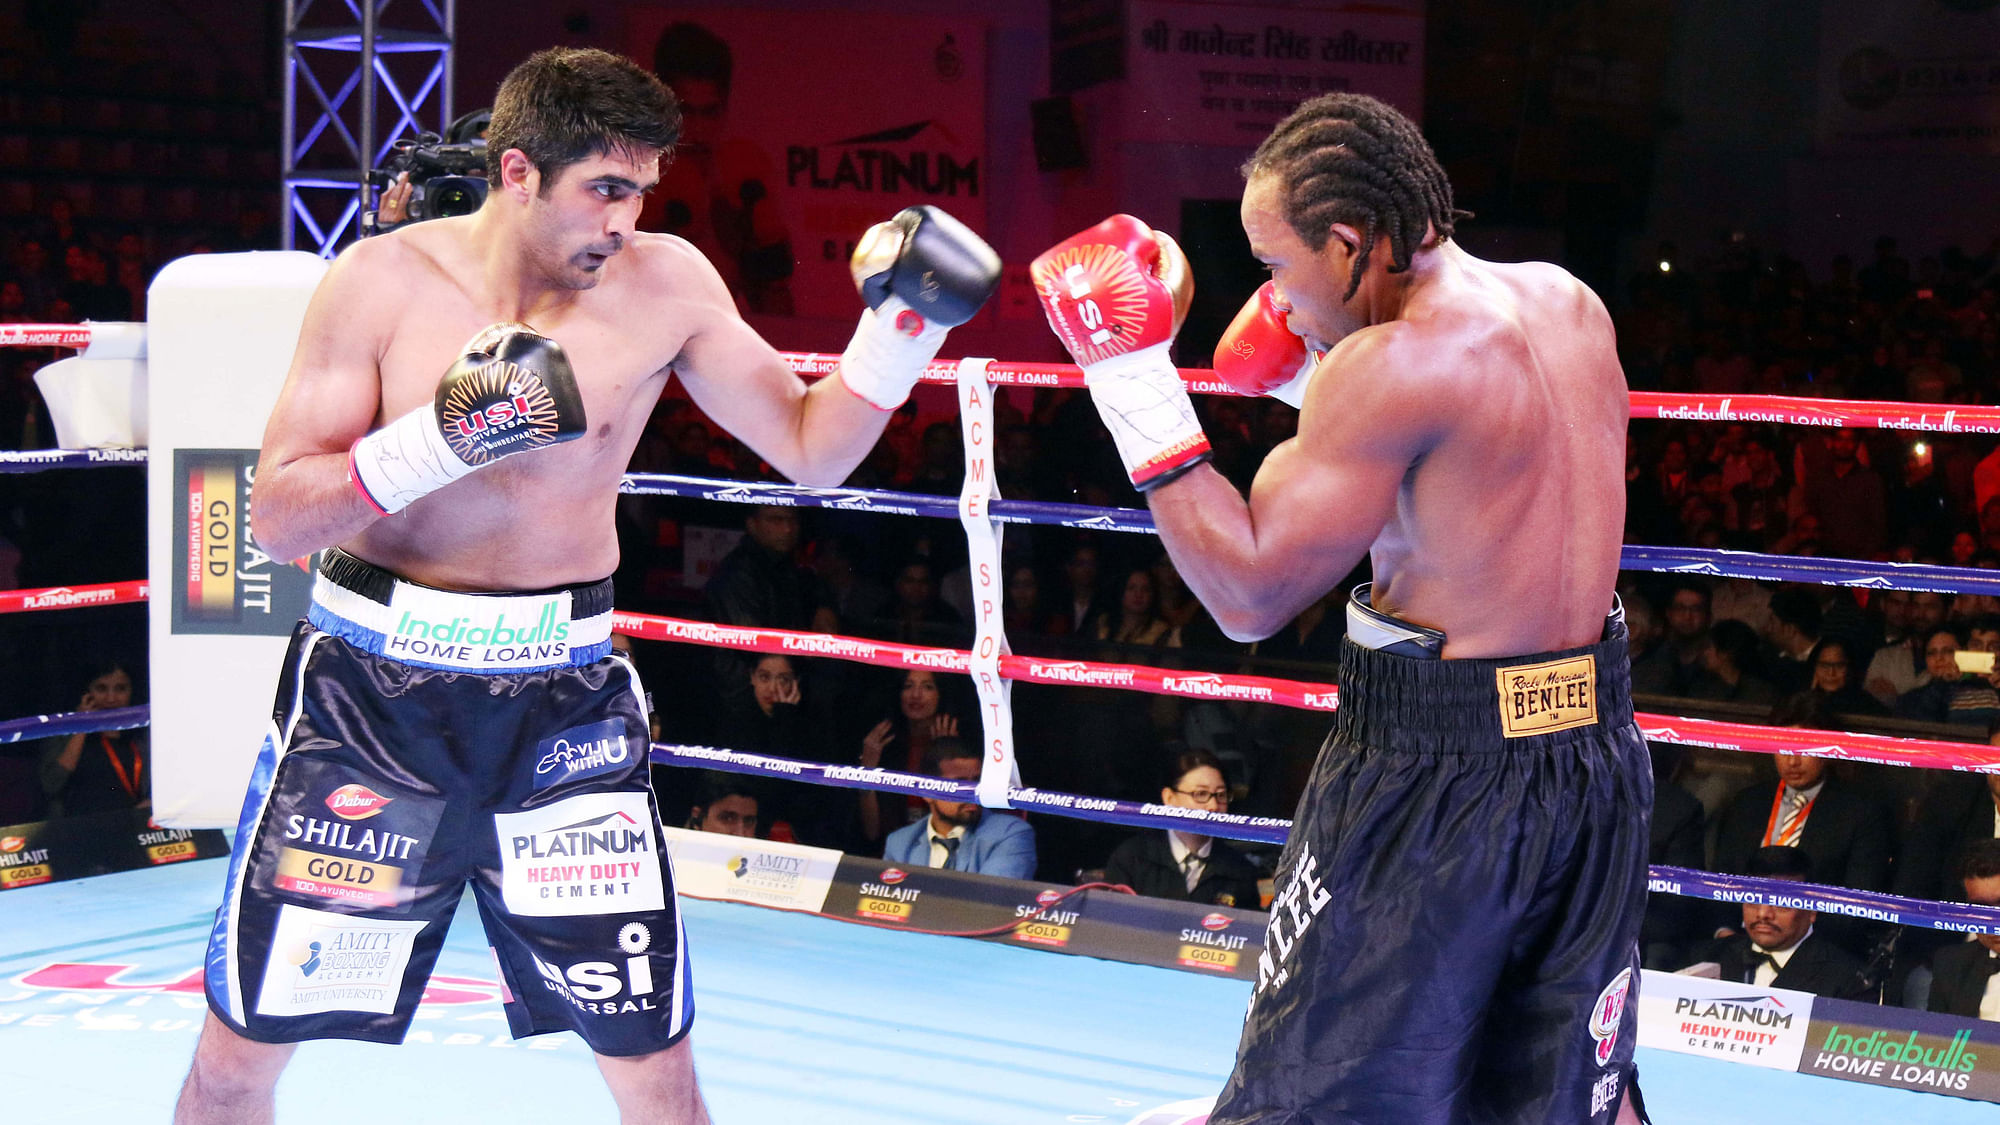 Vijender Singh (left) last defended his WBO Oriental and Asia Pacific Super middleweight titles. against Ernest Amuzu in 2017.